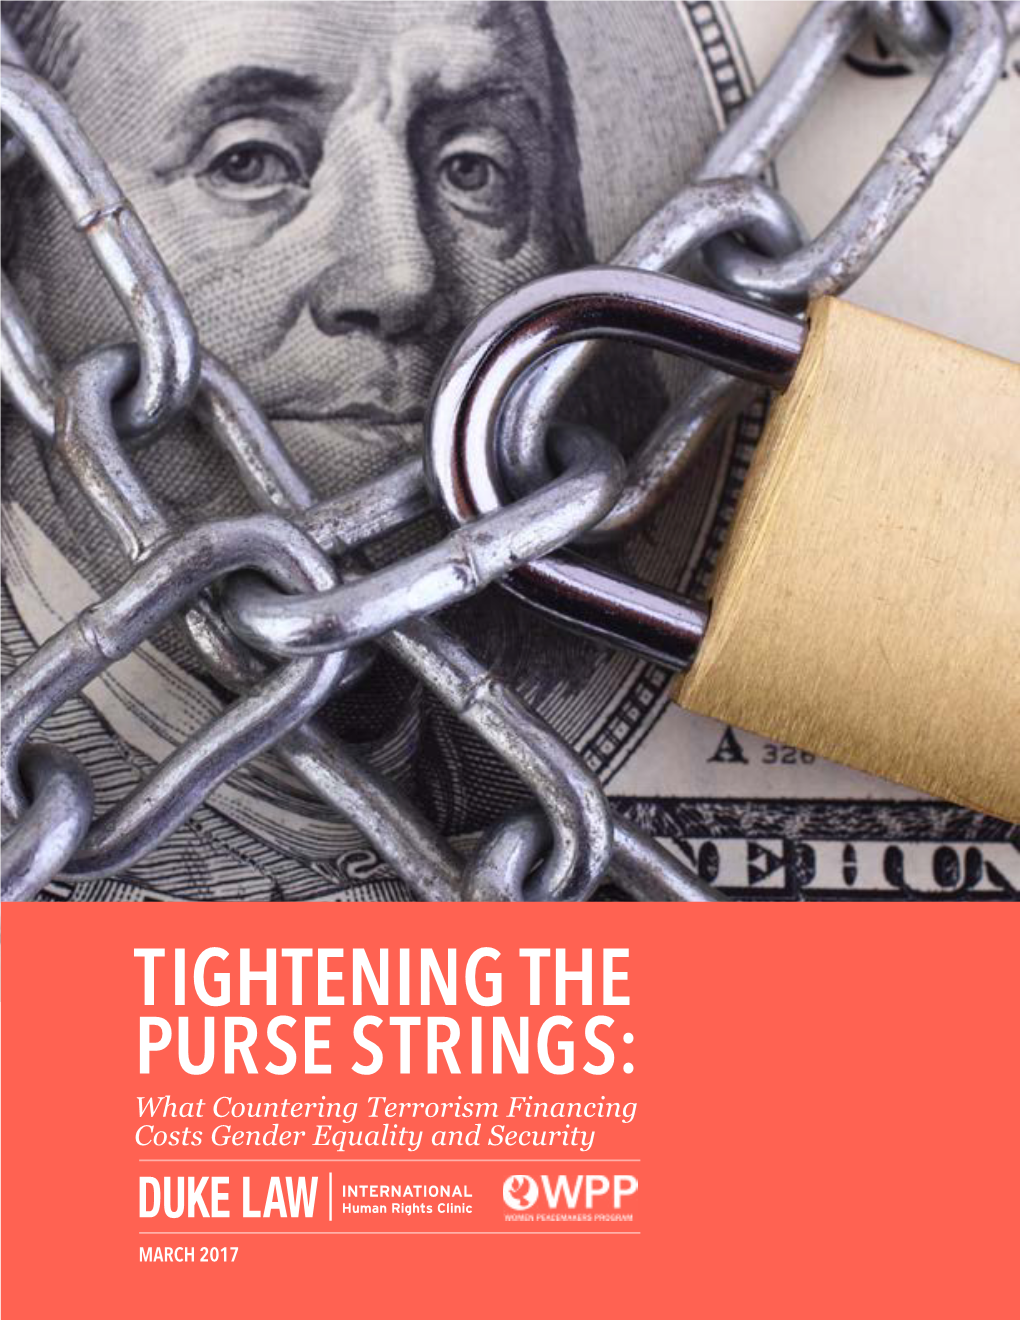 TIGHTENING the PURSE STRINGS: What Countering Terrorism Financing Costs Gender Equality and Security